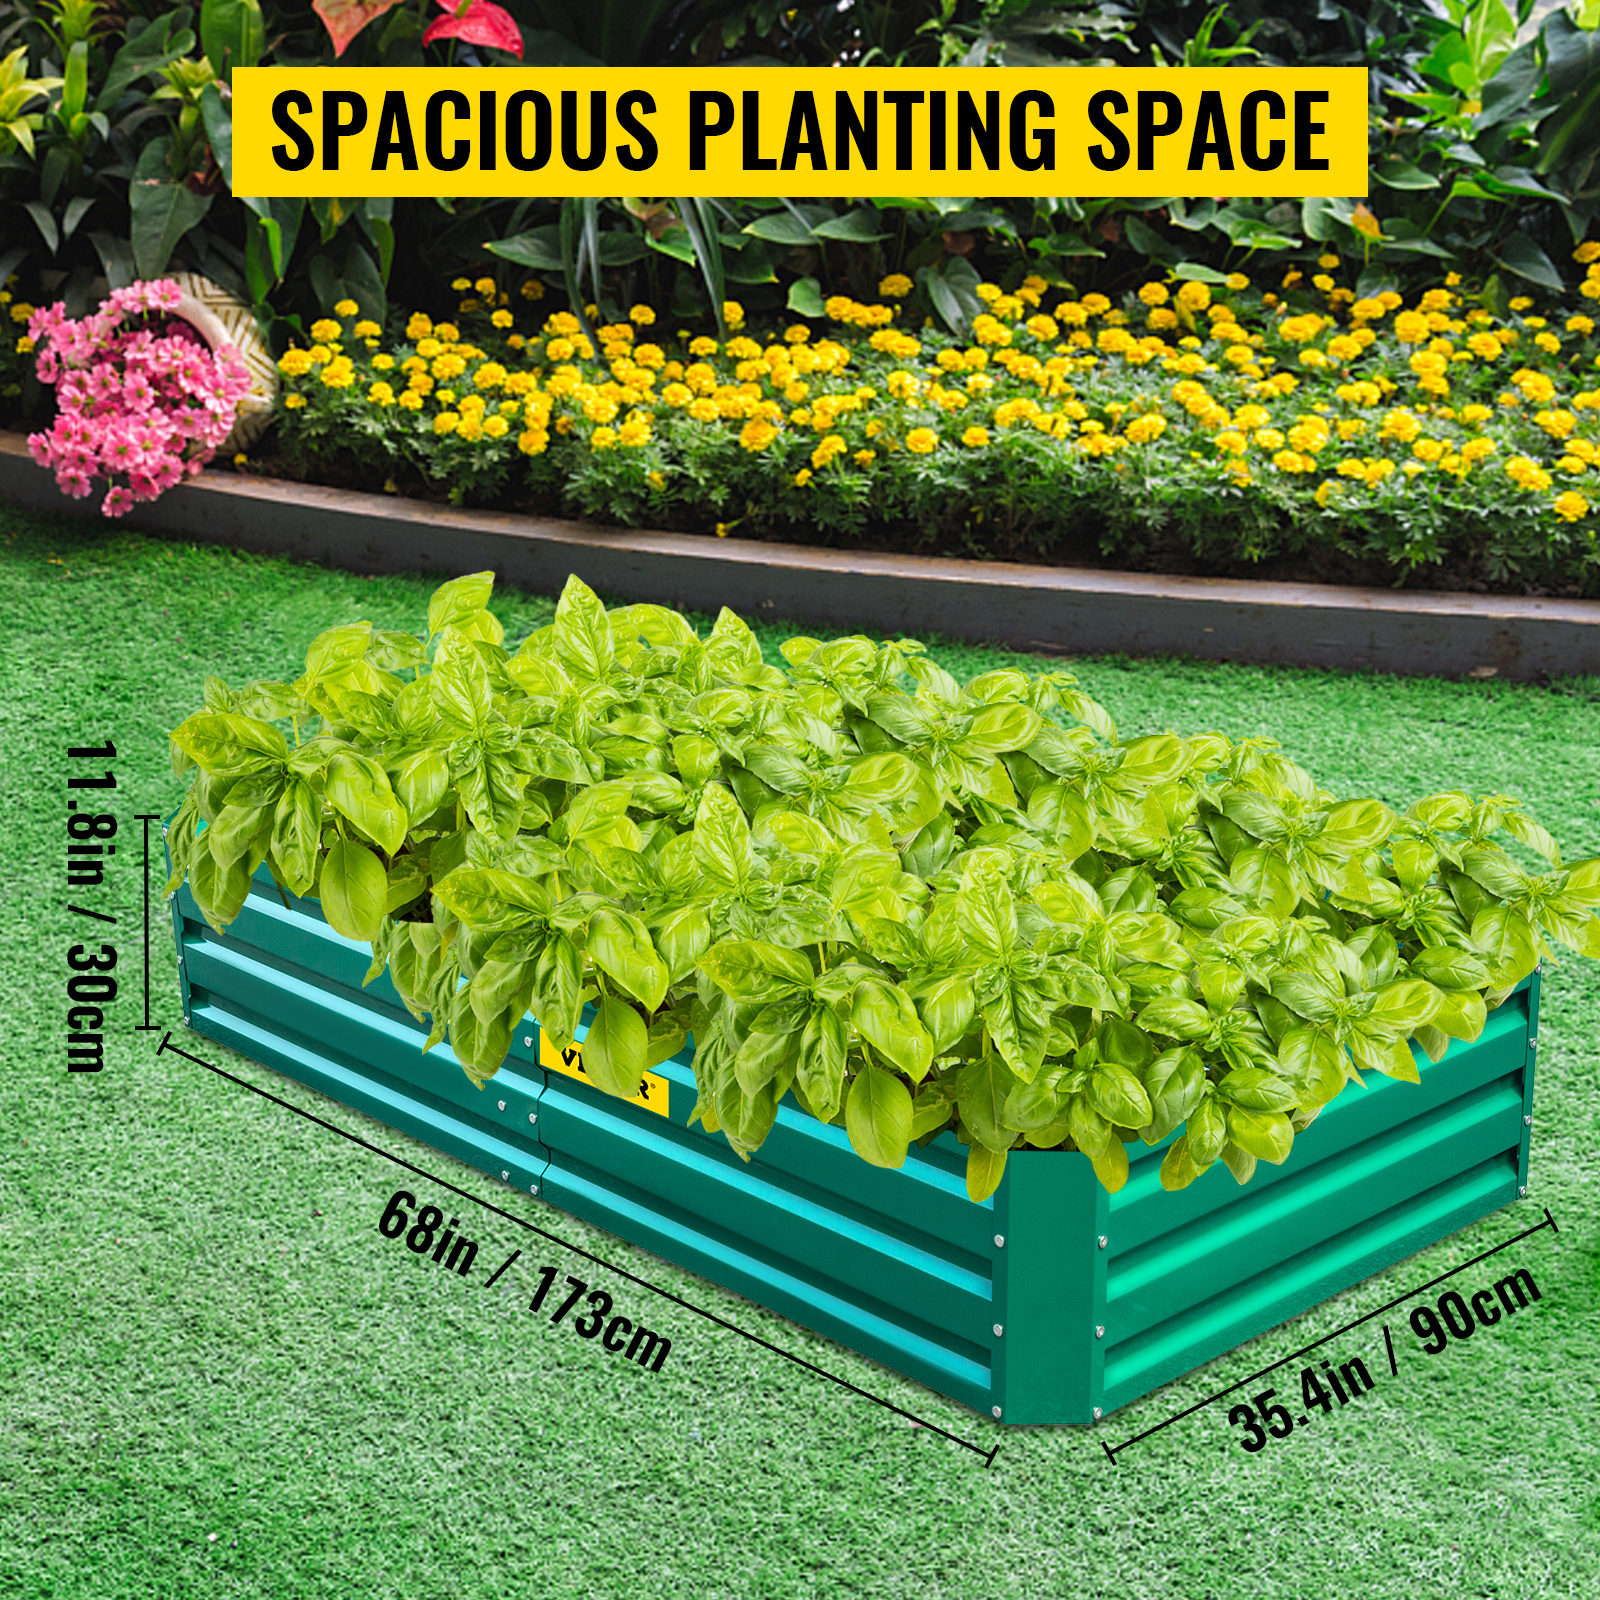 VEVOR 40-in W x 80-in L x 19-in H Thickness: 0.6 Mm Raised Garden